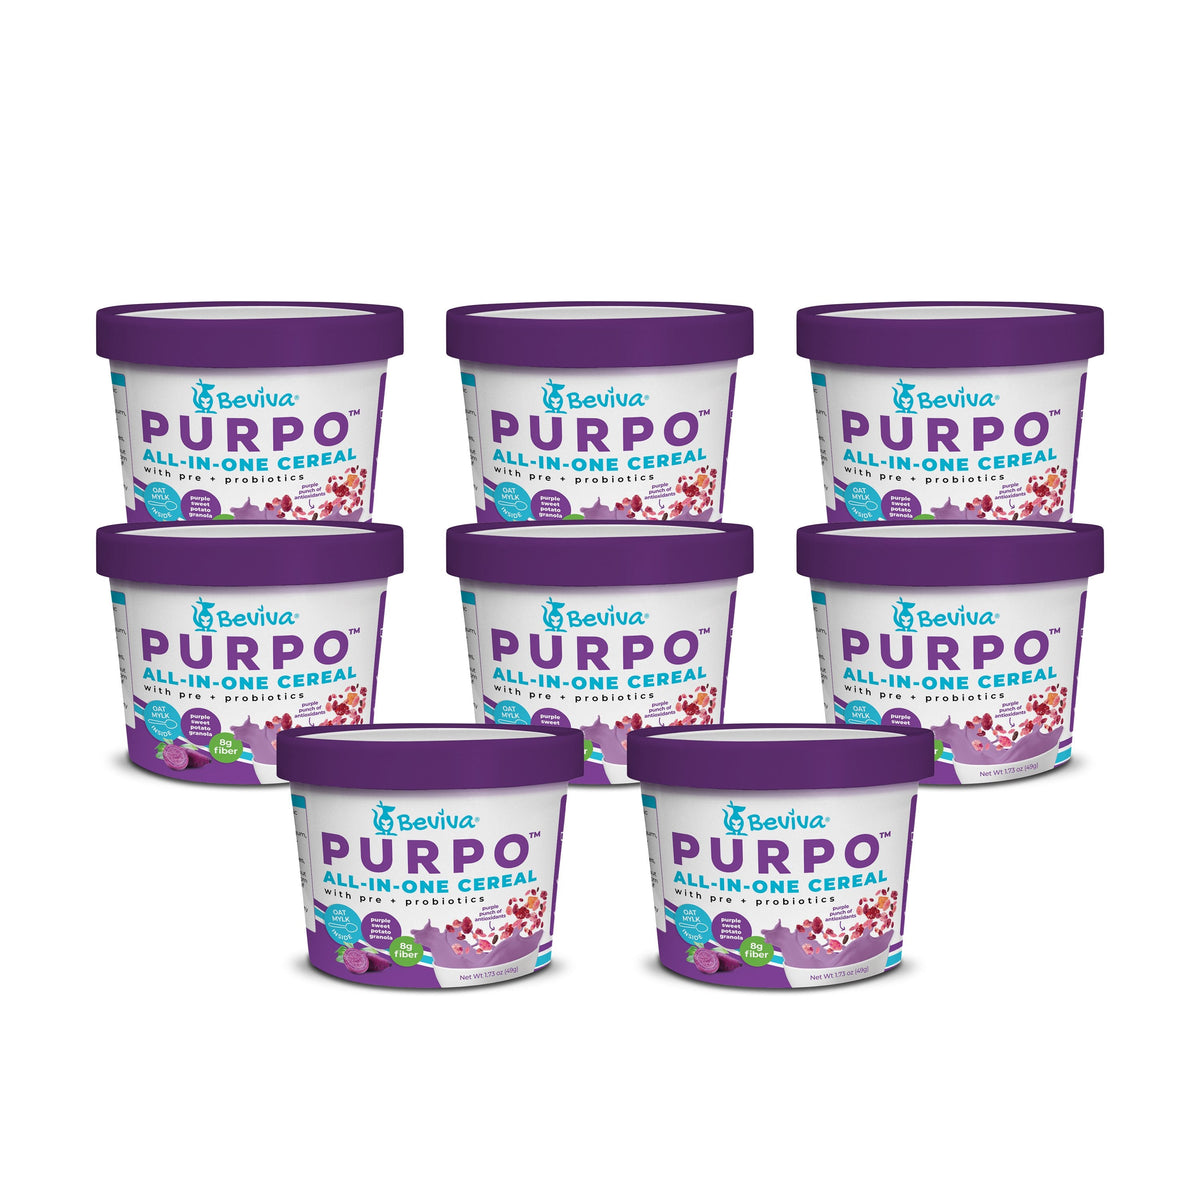 [Beviva] PURPO All-in-One Cereal Cup I 1.73 oz each I 24 Pack